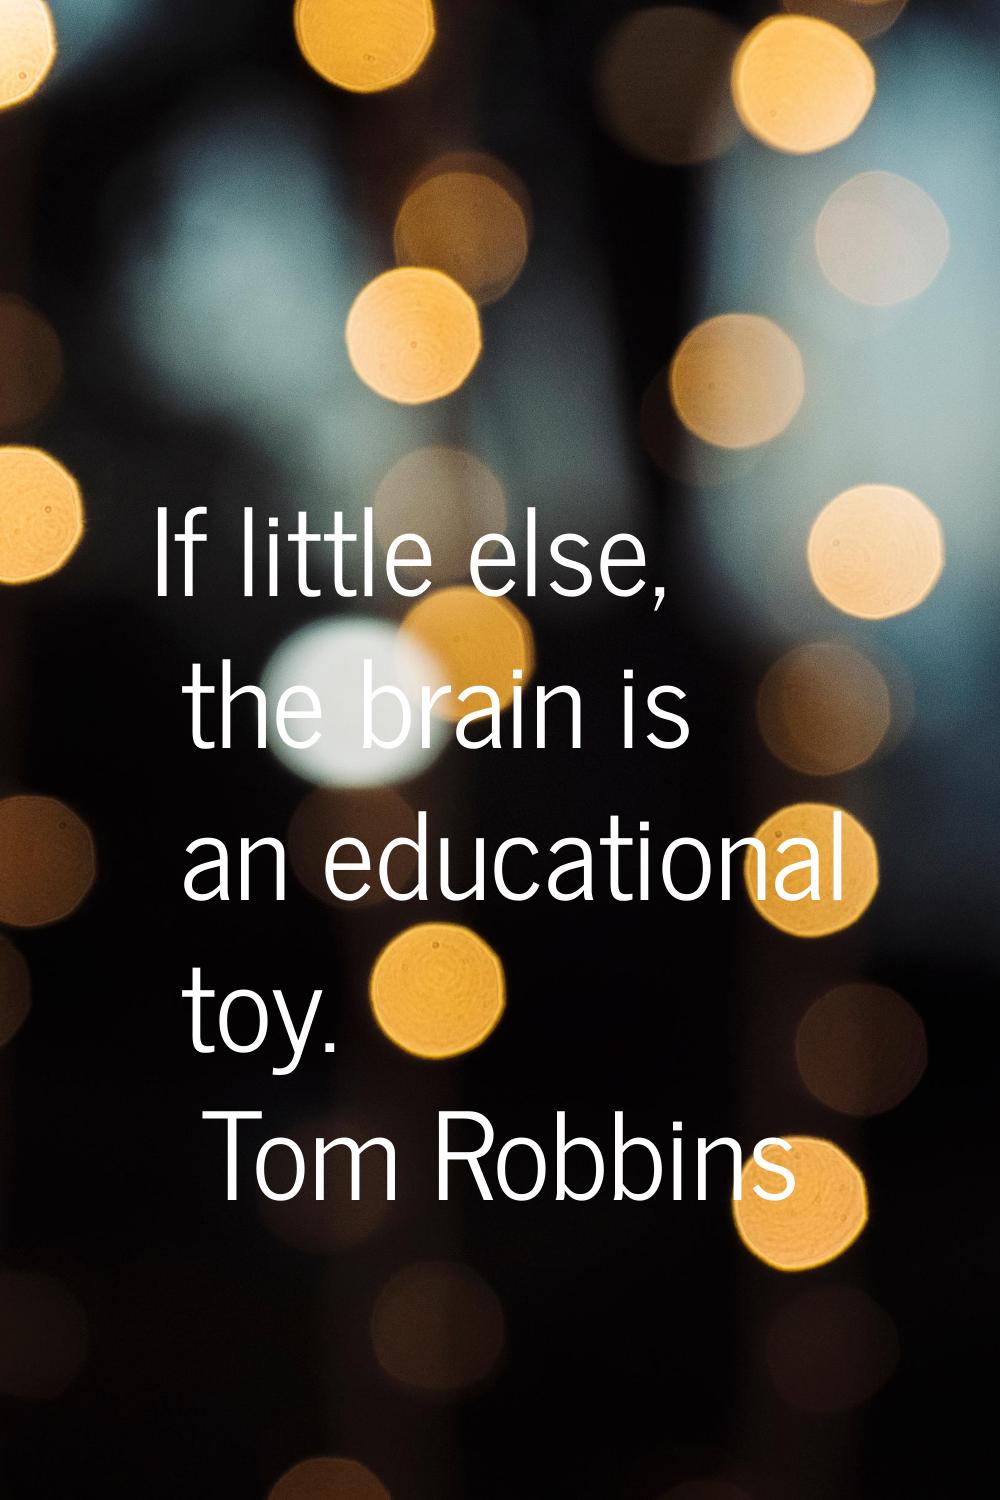 If little else, the brain is an educational toy.